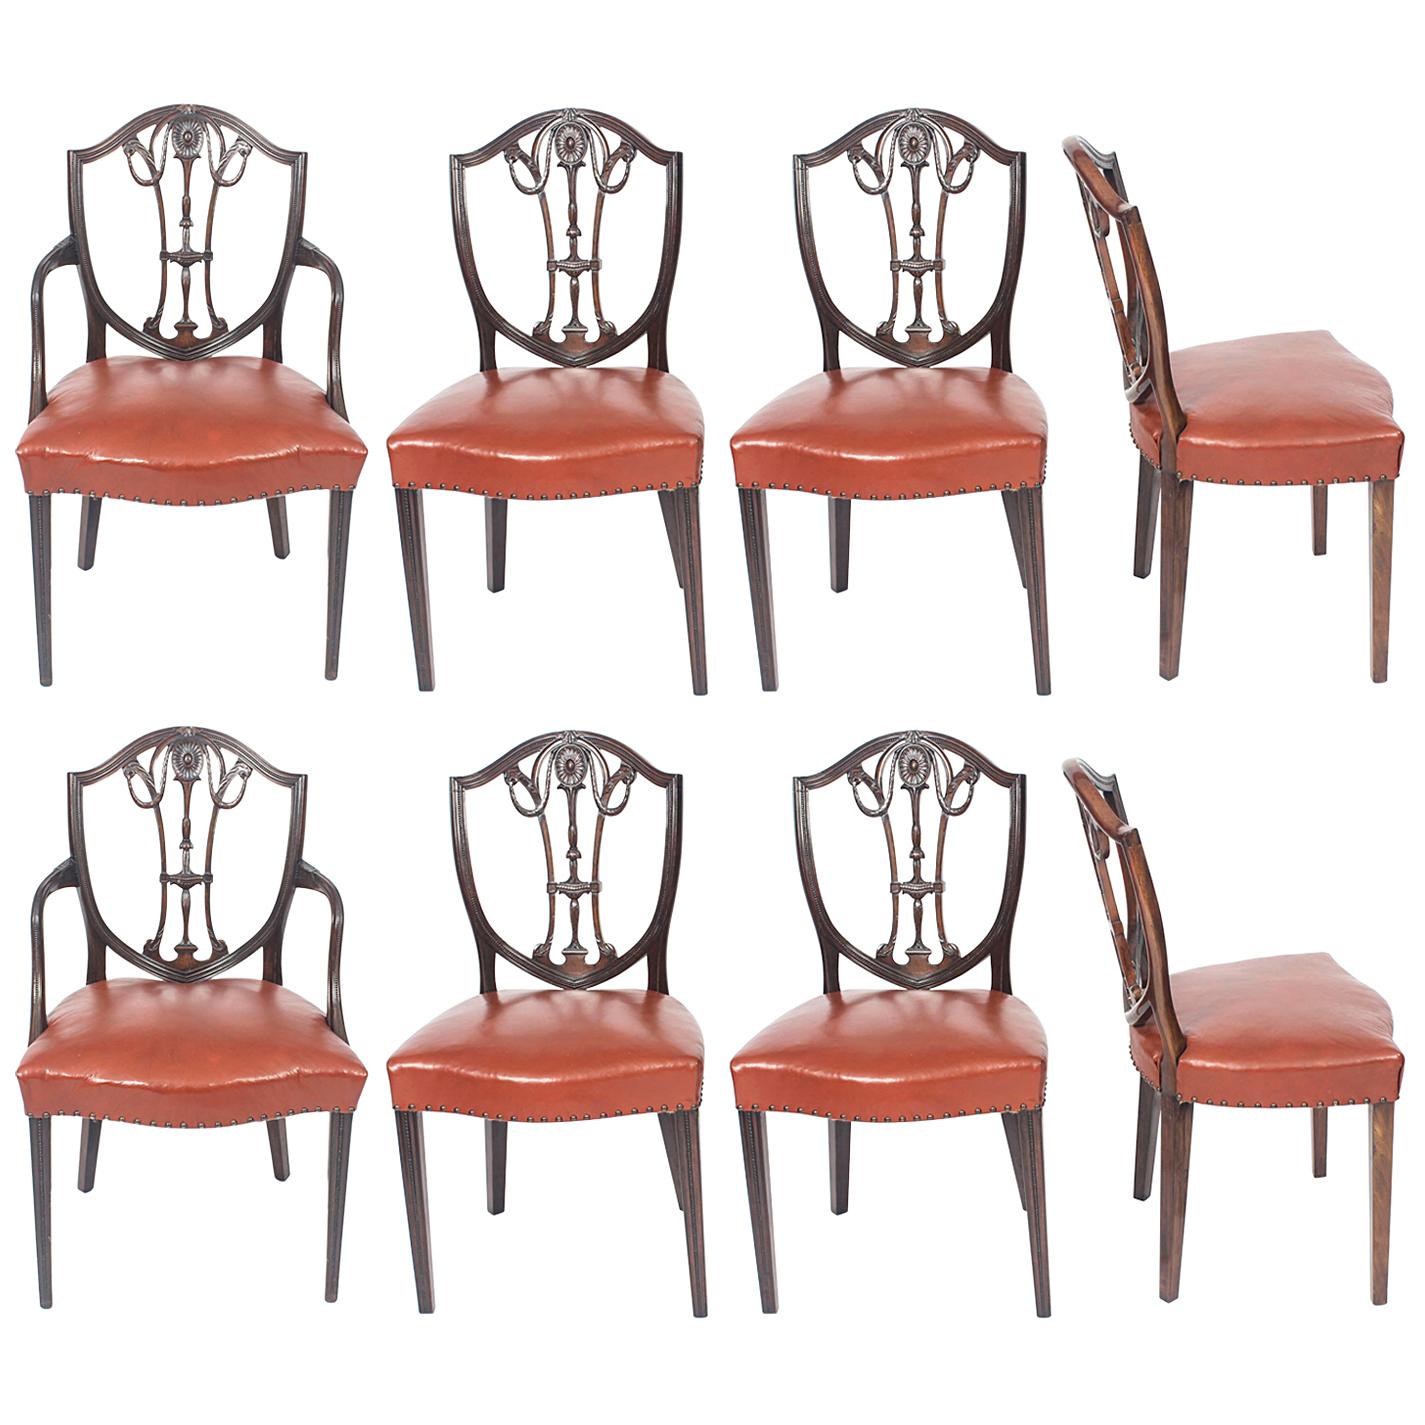 Antique Set of Eight English Hepplewhite Shield Back Dining Chairs 19th Century